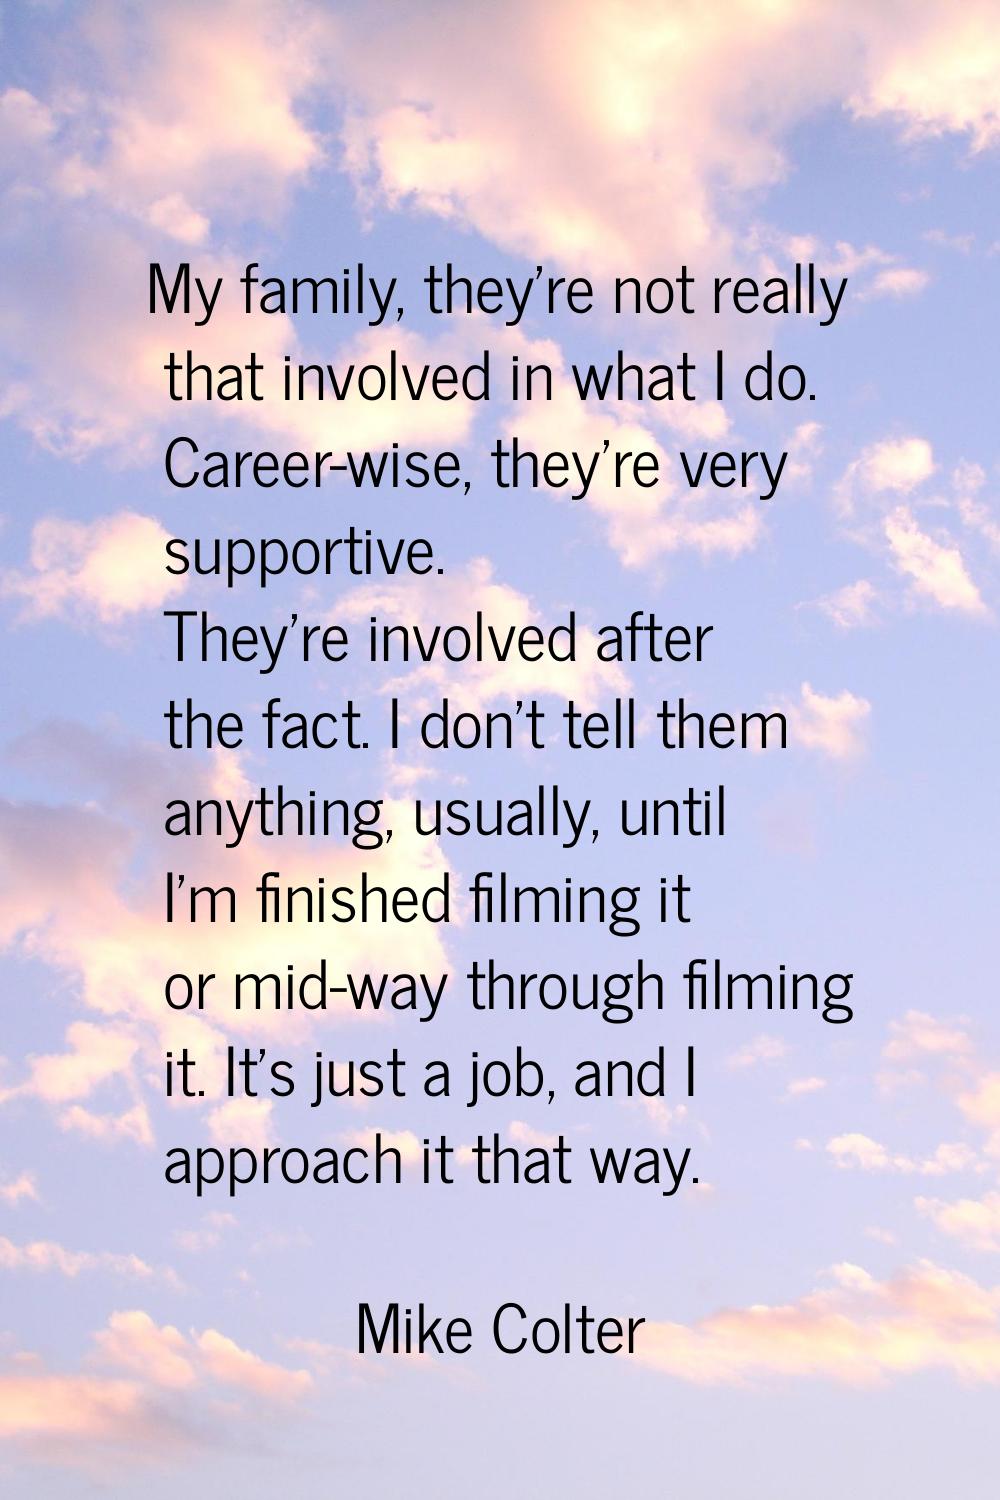 My family, they're not really that involved in what I do. Career-wise, they're very supportive. The